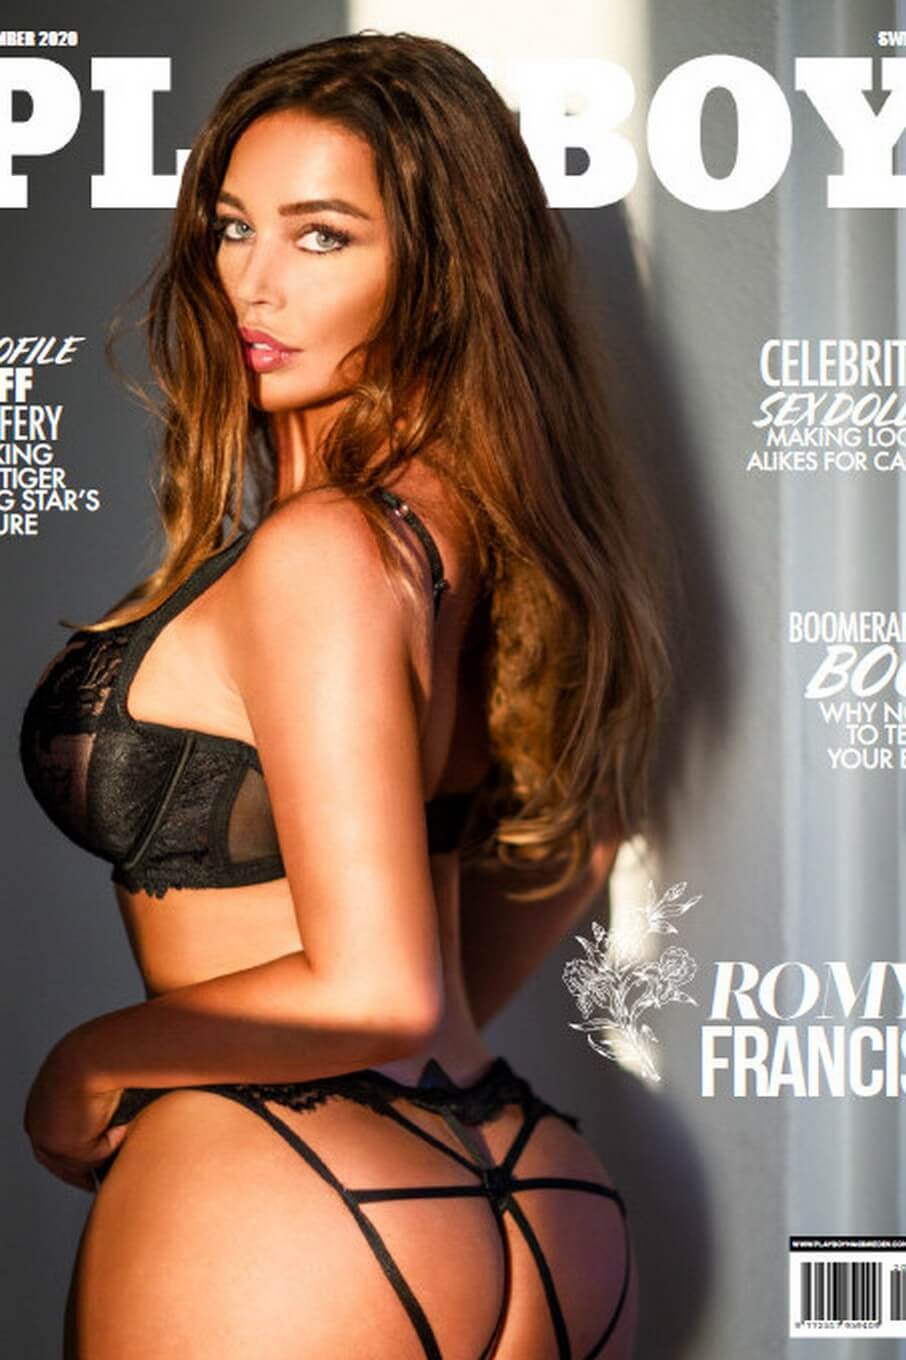 Playboy magazine Sweden Sept 20 issue-with busty cover girl (5 photos) · Pandesia World photo